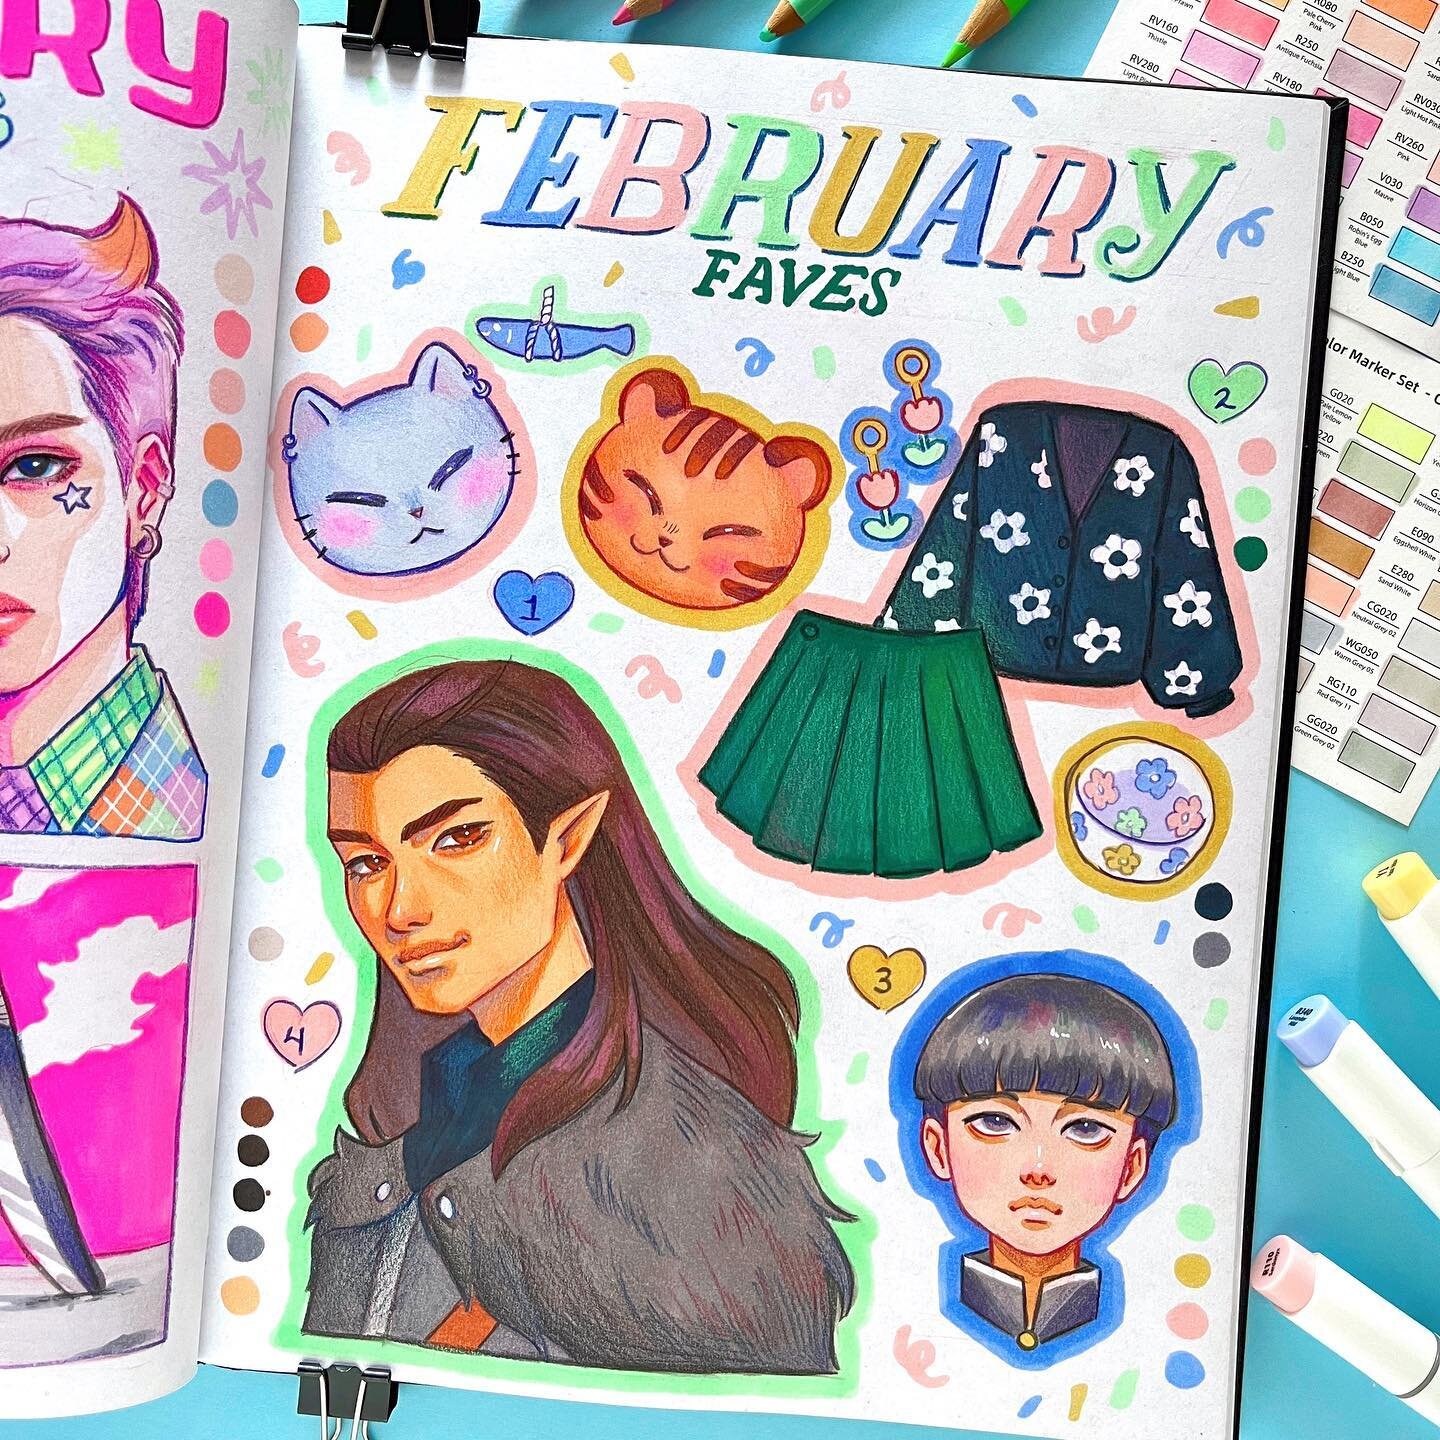 FEBRUARY FAVOURITES! Livestream up on my YT channel if you missed it! And thanks for those of you who joined who made it so fun as always 🤩
1. Suchwita: Suga x Hoshi 🐱🐯🥹
2. Thrift and art market shopping/finds! 🛍️ 
3. Mob Psycho 100 🔥
4. The Le